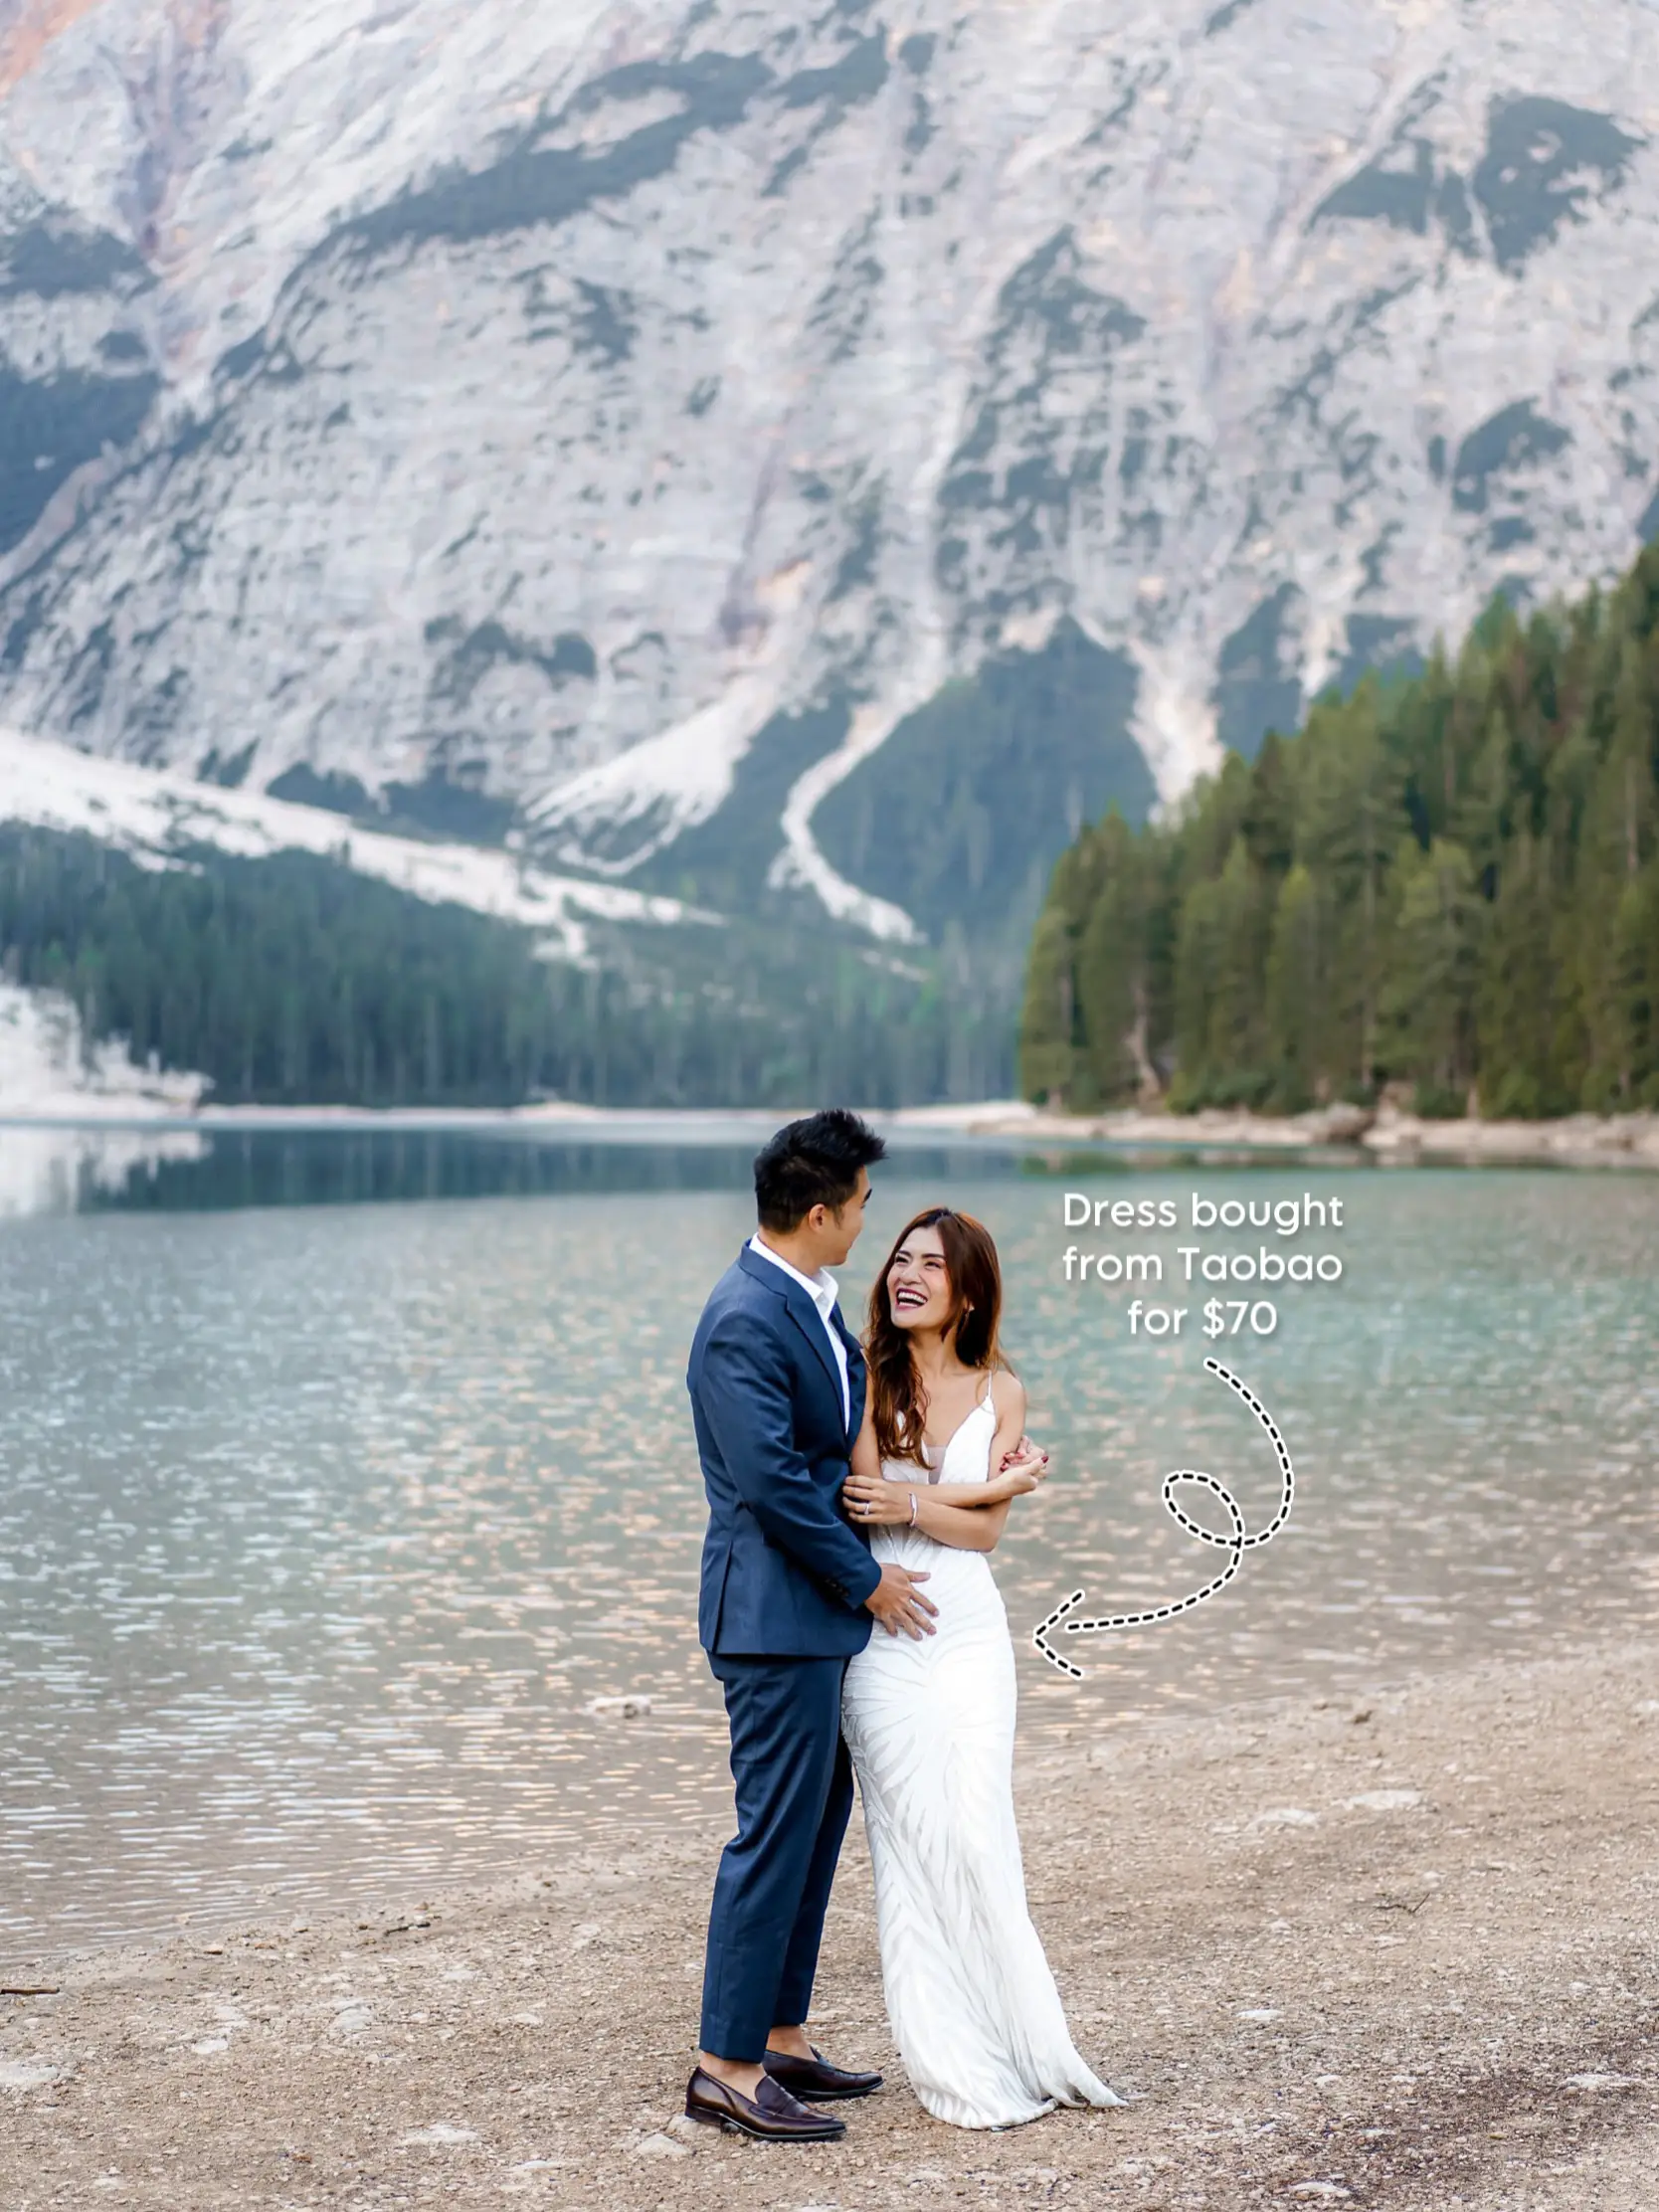 Pre-wedding shoot at UNESCO Heritage Site ⛰️✨'s images(3)